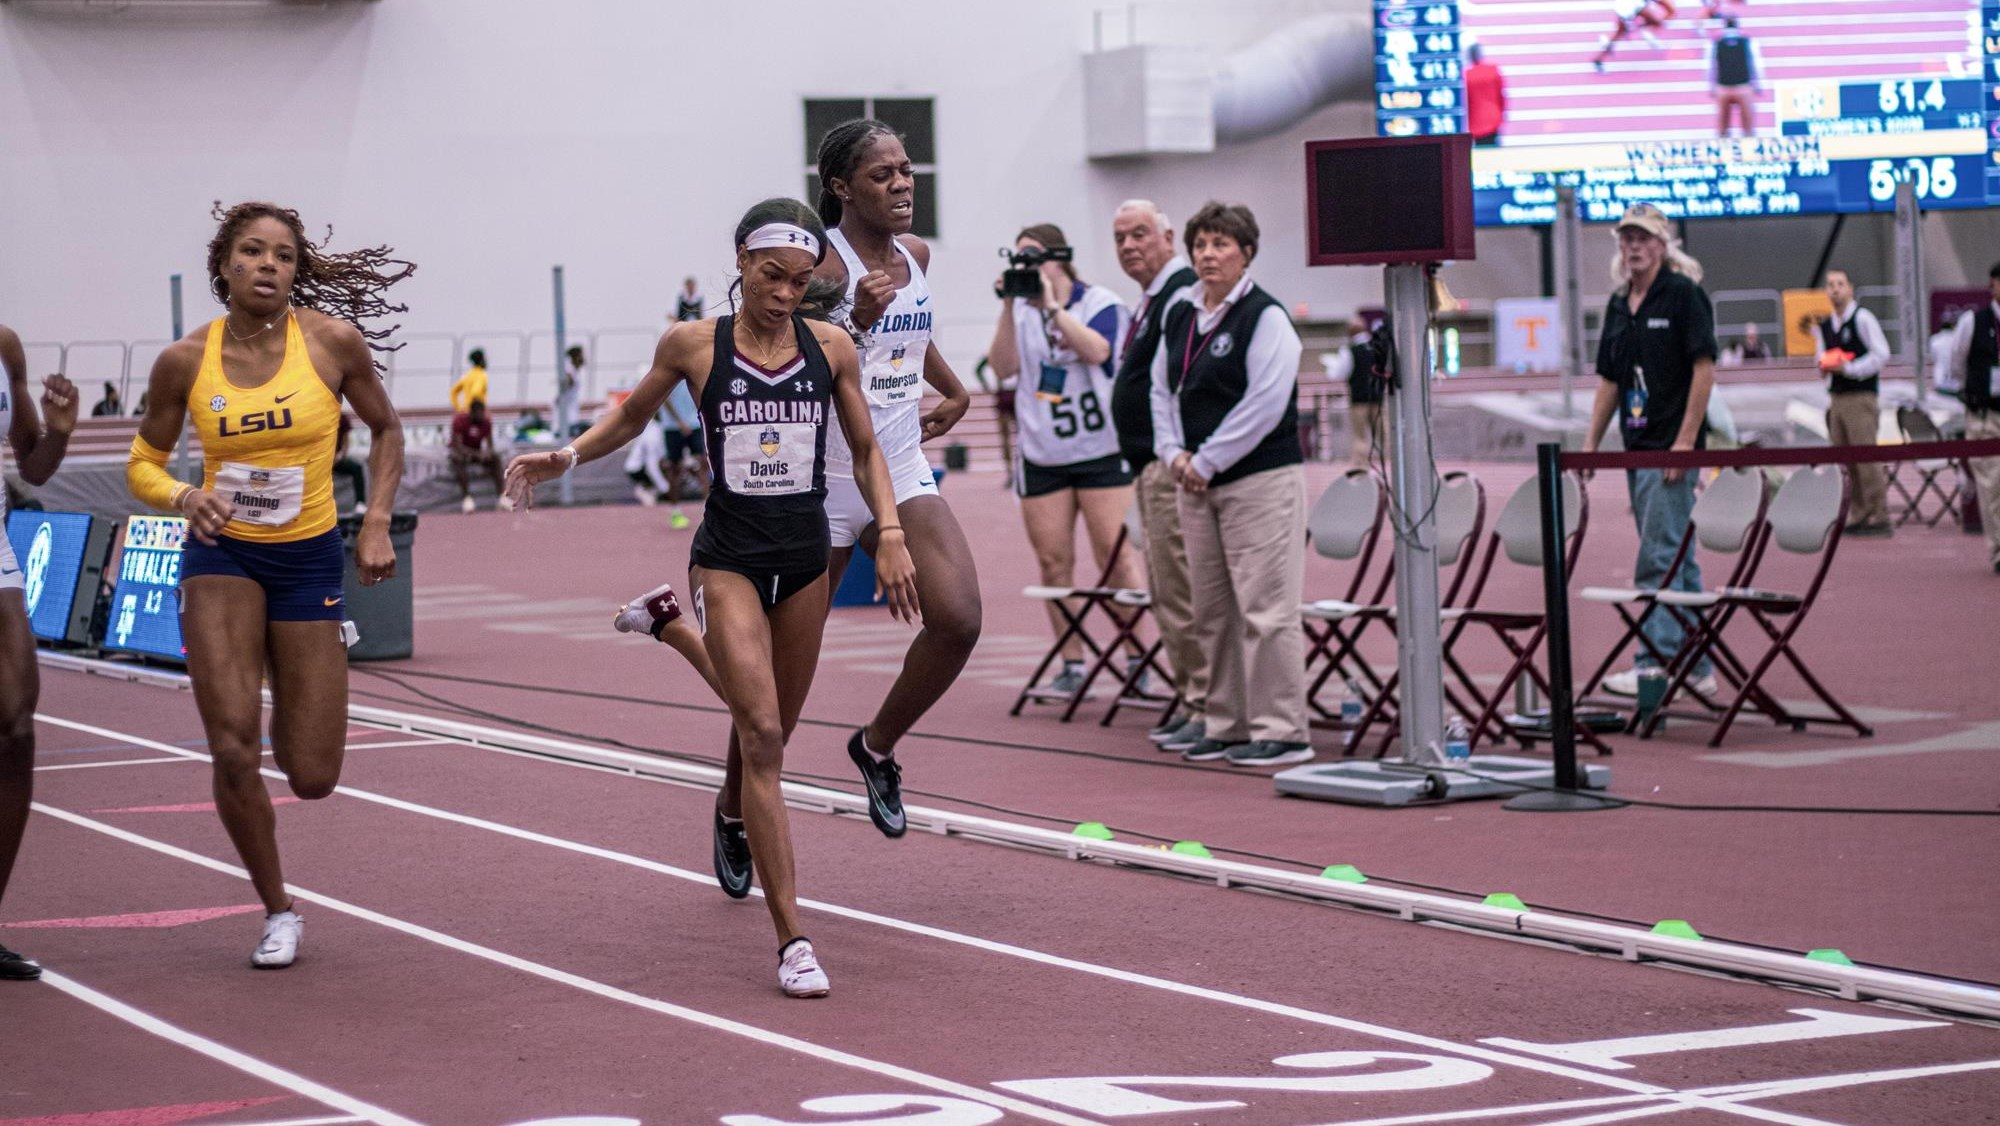 Davis Earns Silver Medal on Final Day of Indoor SEC Championships